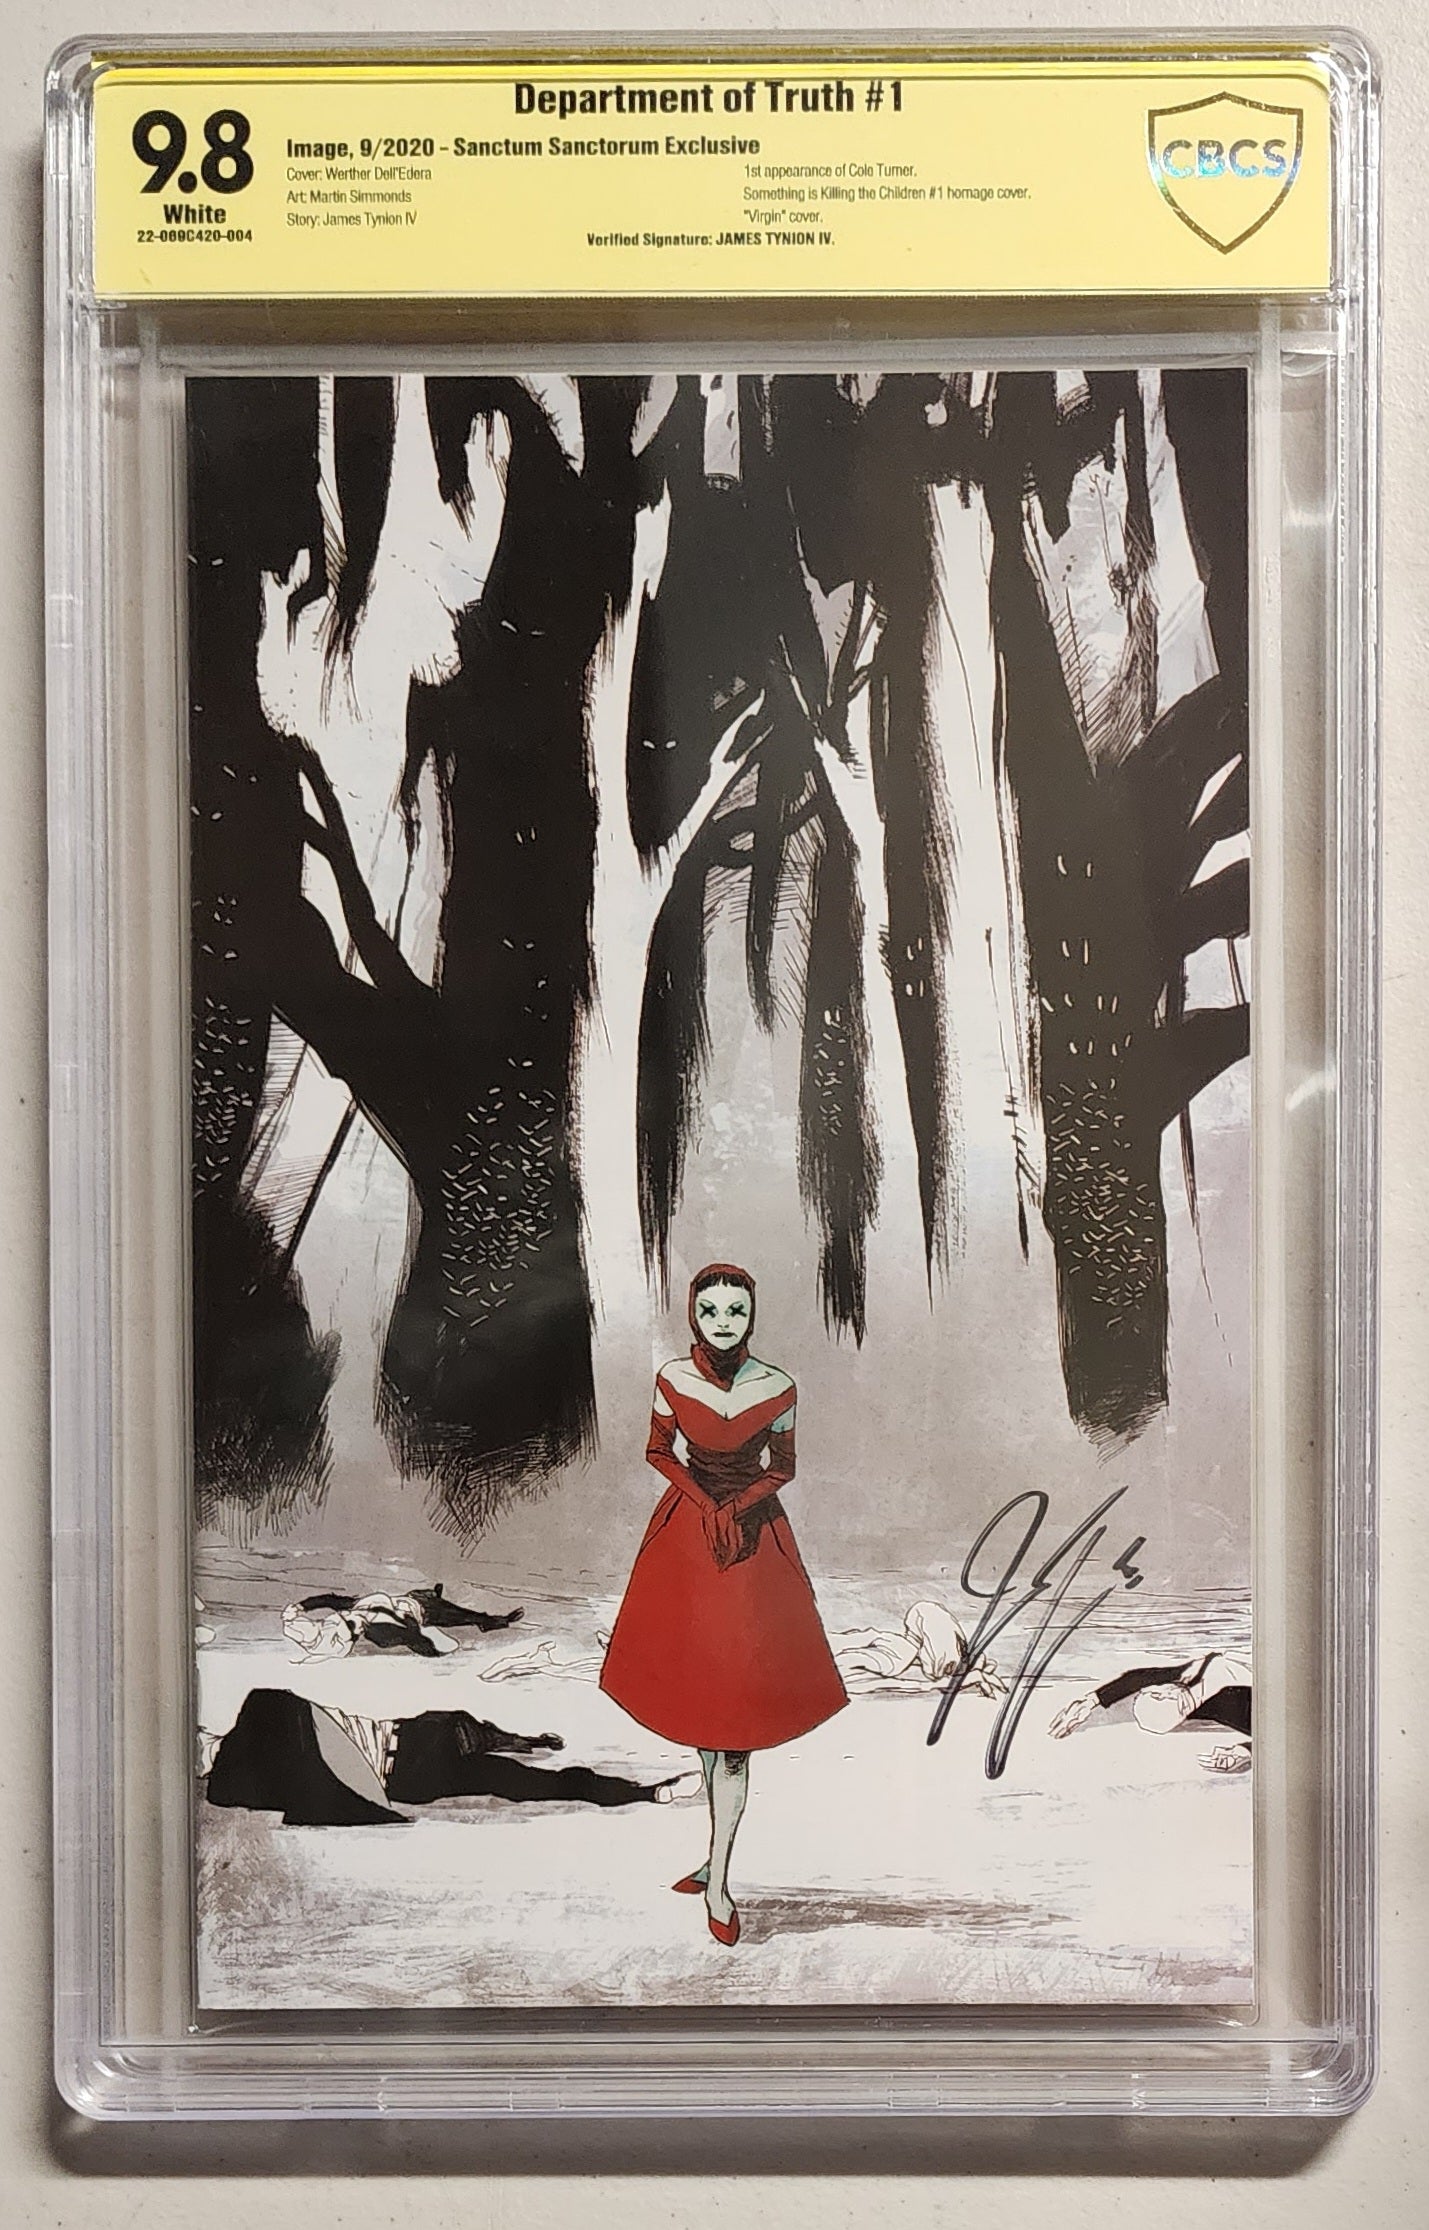 9.8 CBCS DEPARTMENT OF TRUTH #1 SSCO EXCLUSIVE HOMAGE VIRGIN VARIANT SIGNED BY JAMES TYNION IV [22-069C420-004]